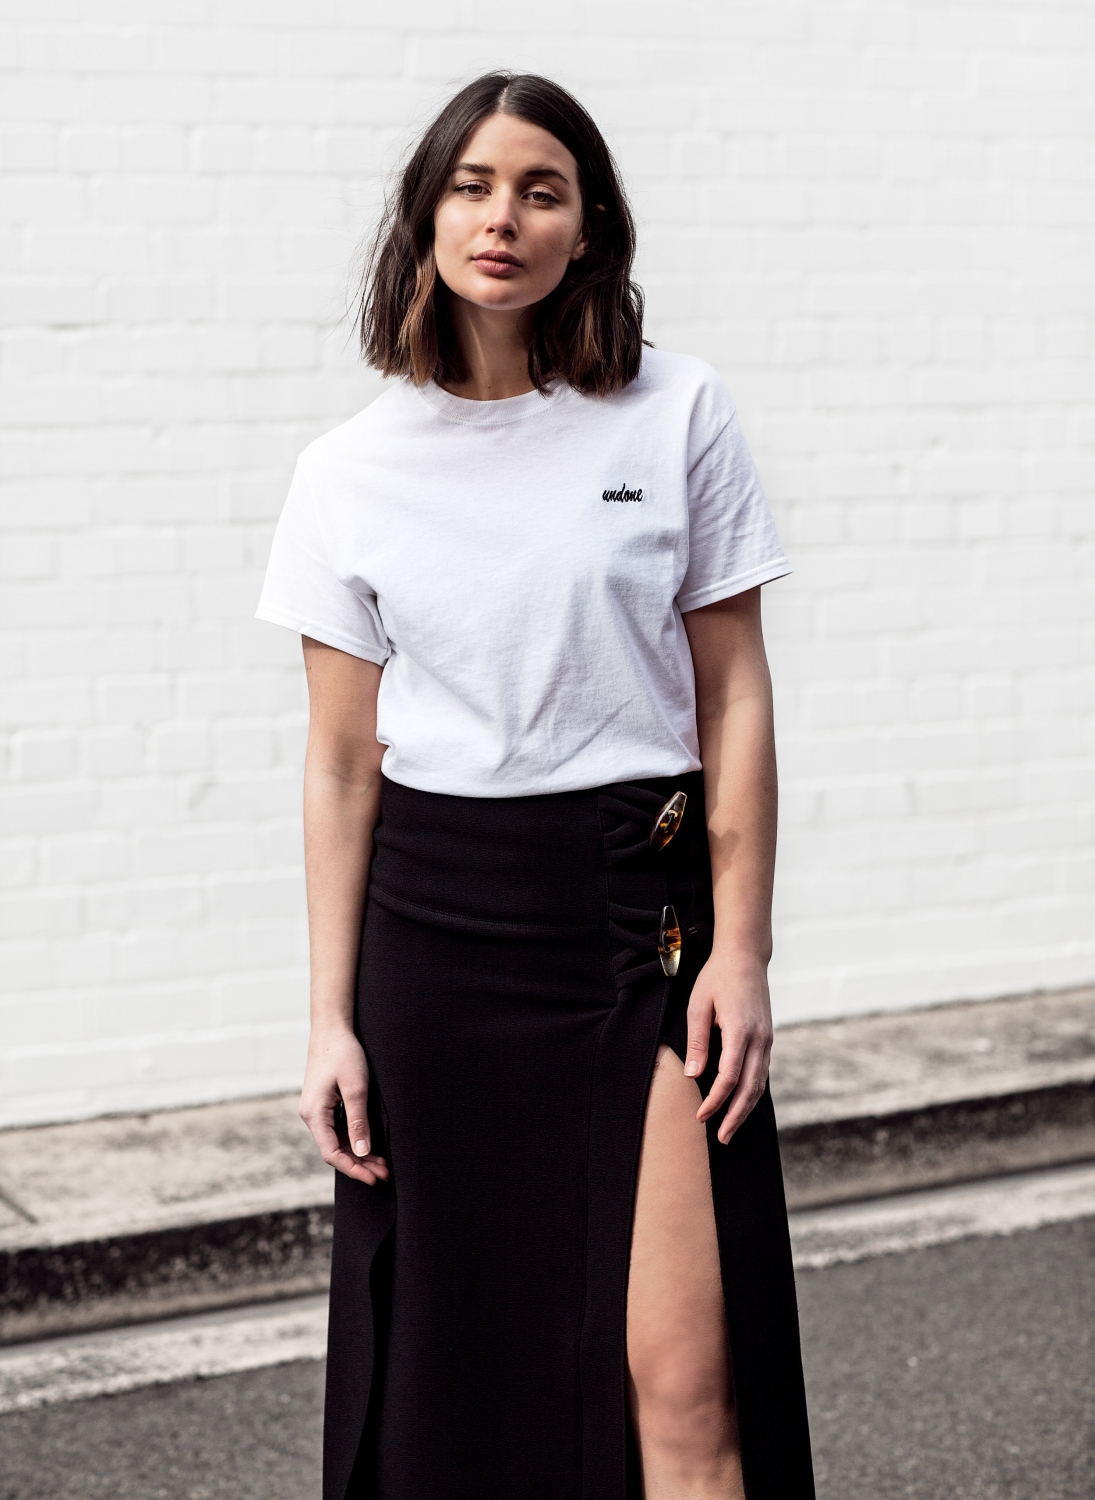 Double Trouble t-shirt and Christopher Esber skirt | The UNDONE online store | Outfit | Style | Streetstyle | HarperandHarley